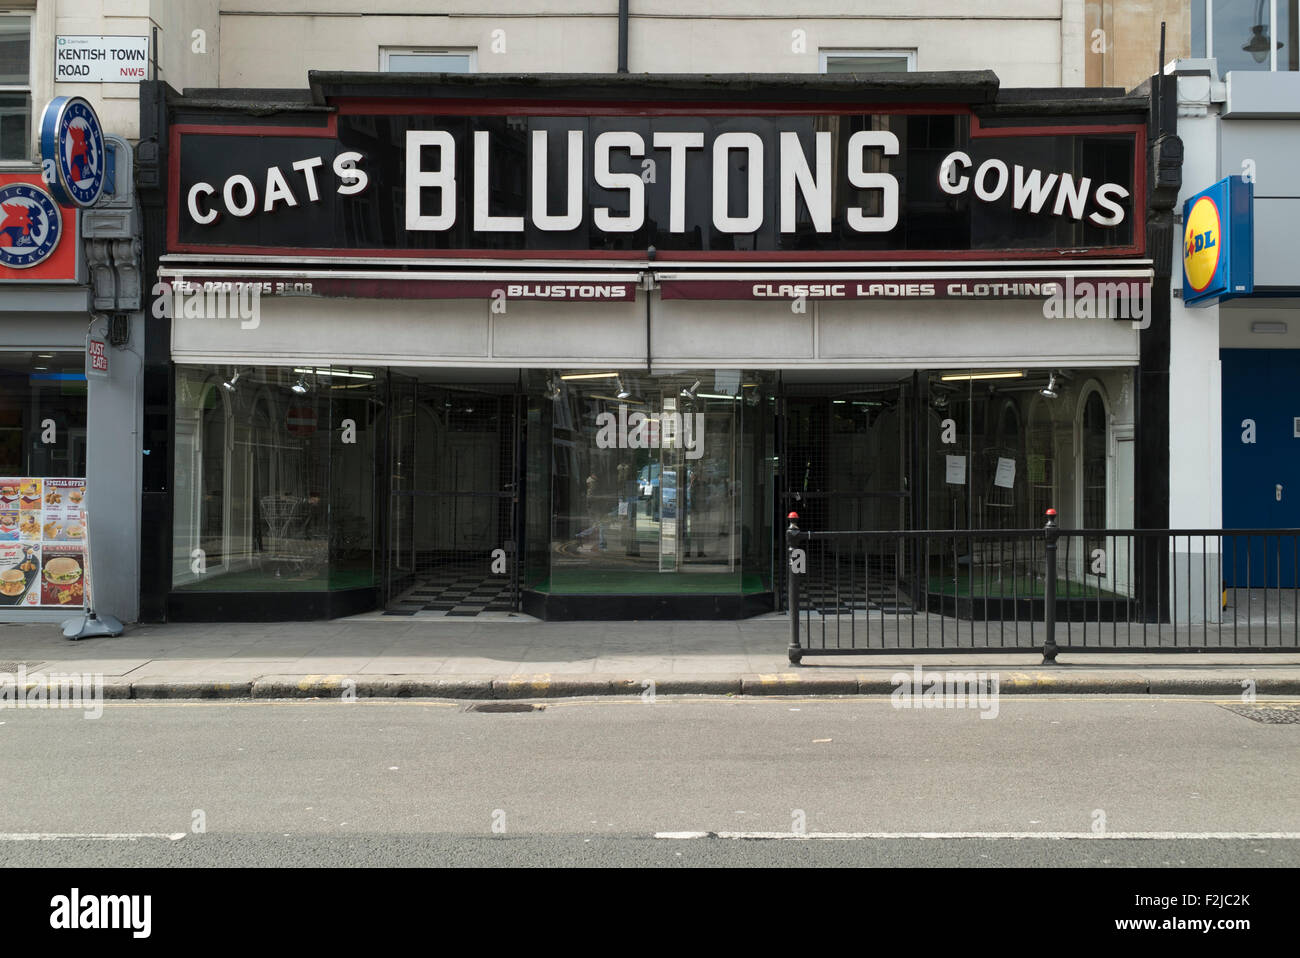 Blustons women's clothing shop in Kentish Town London listed facade Stock Photo